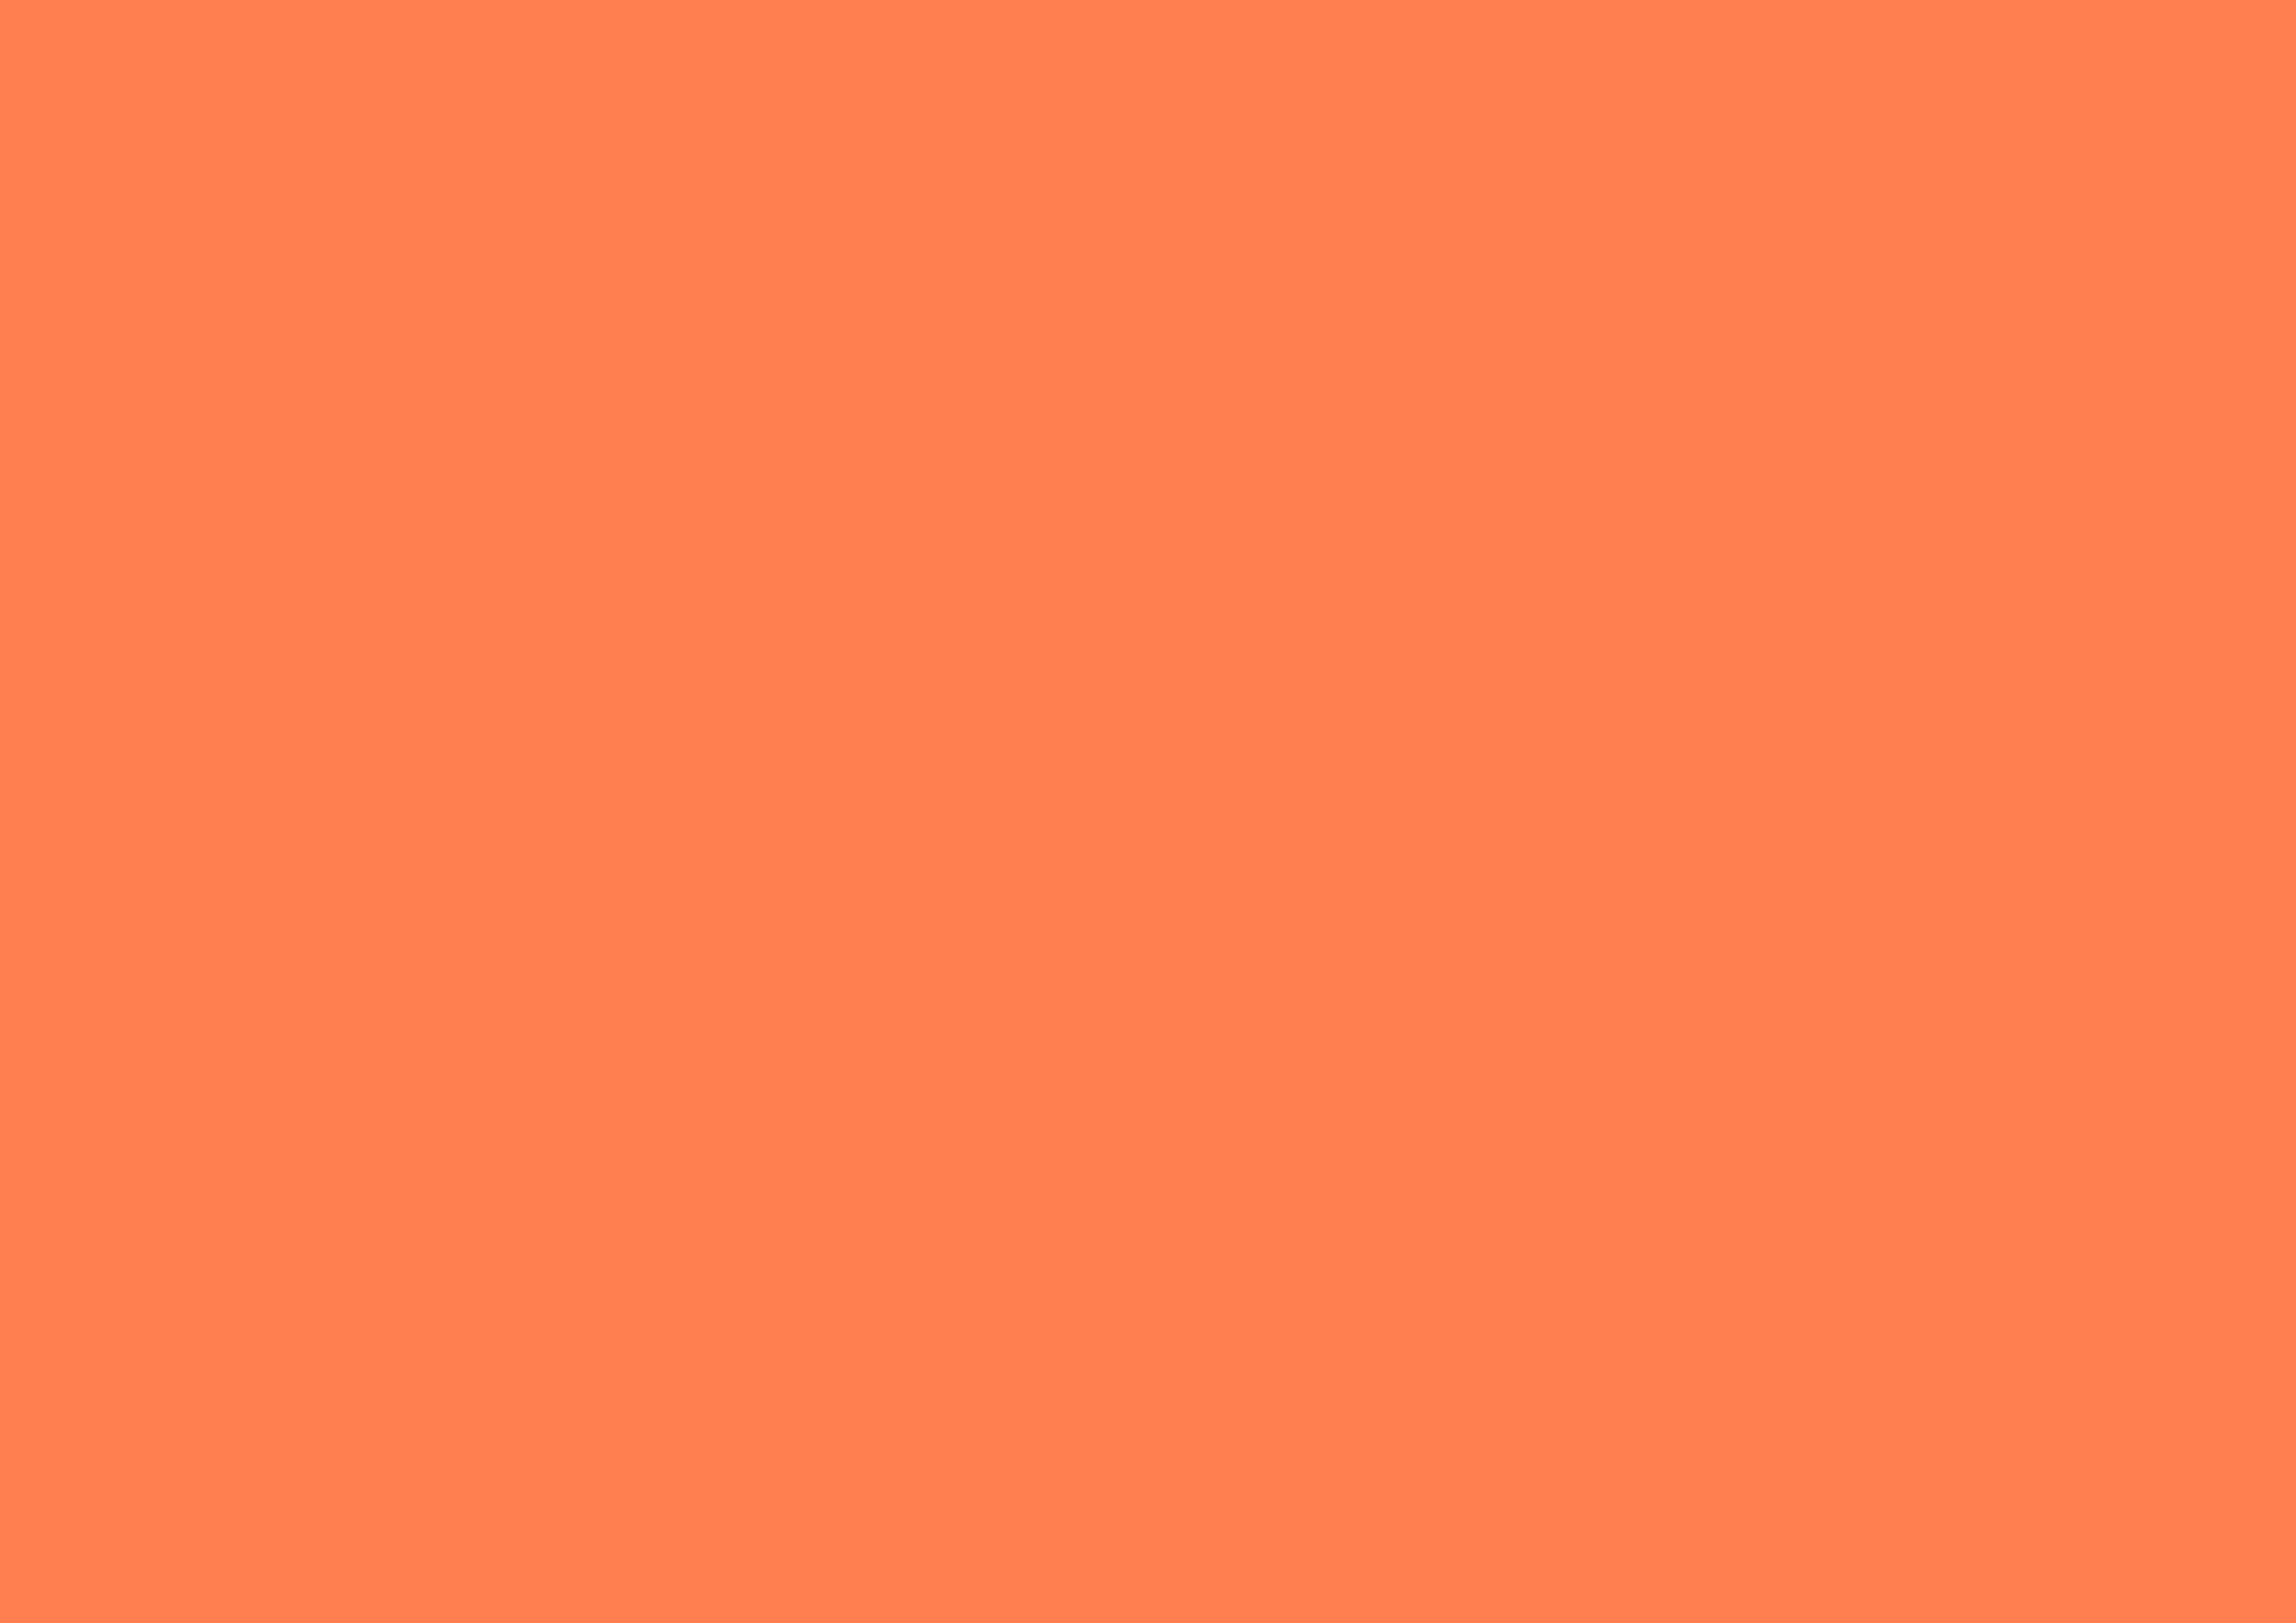 3508x2480 Coral Solid Color Background